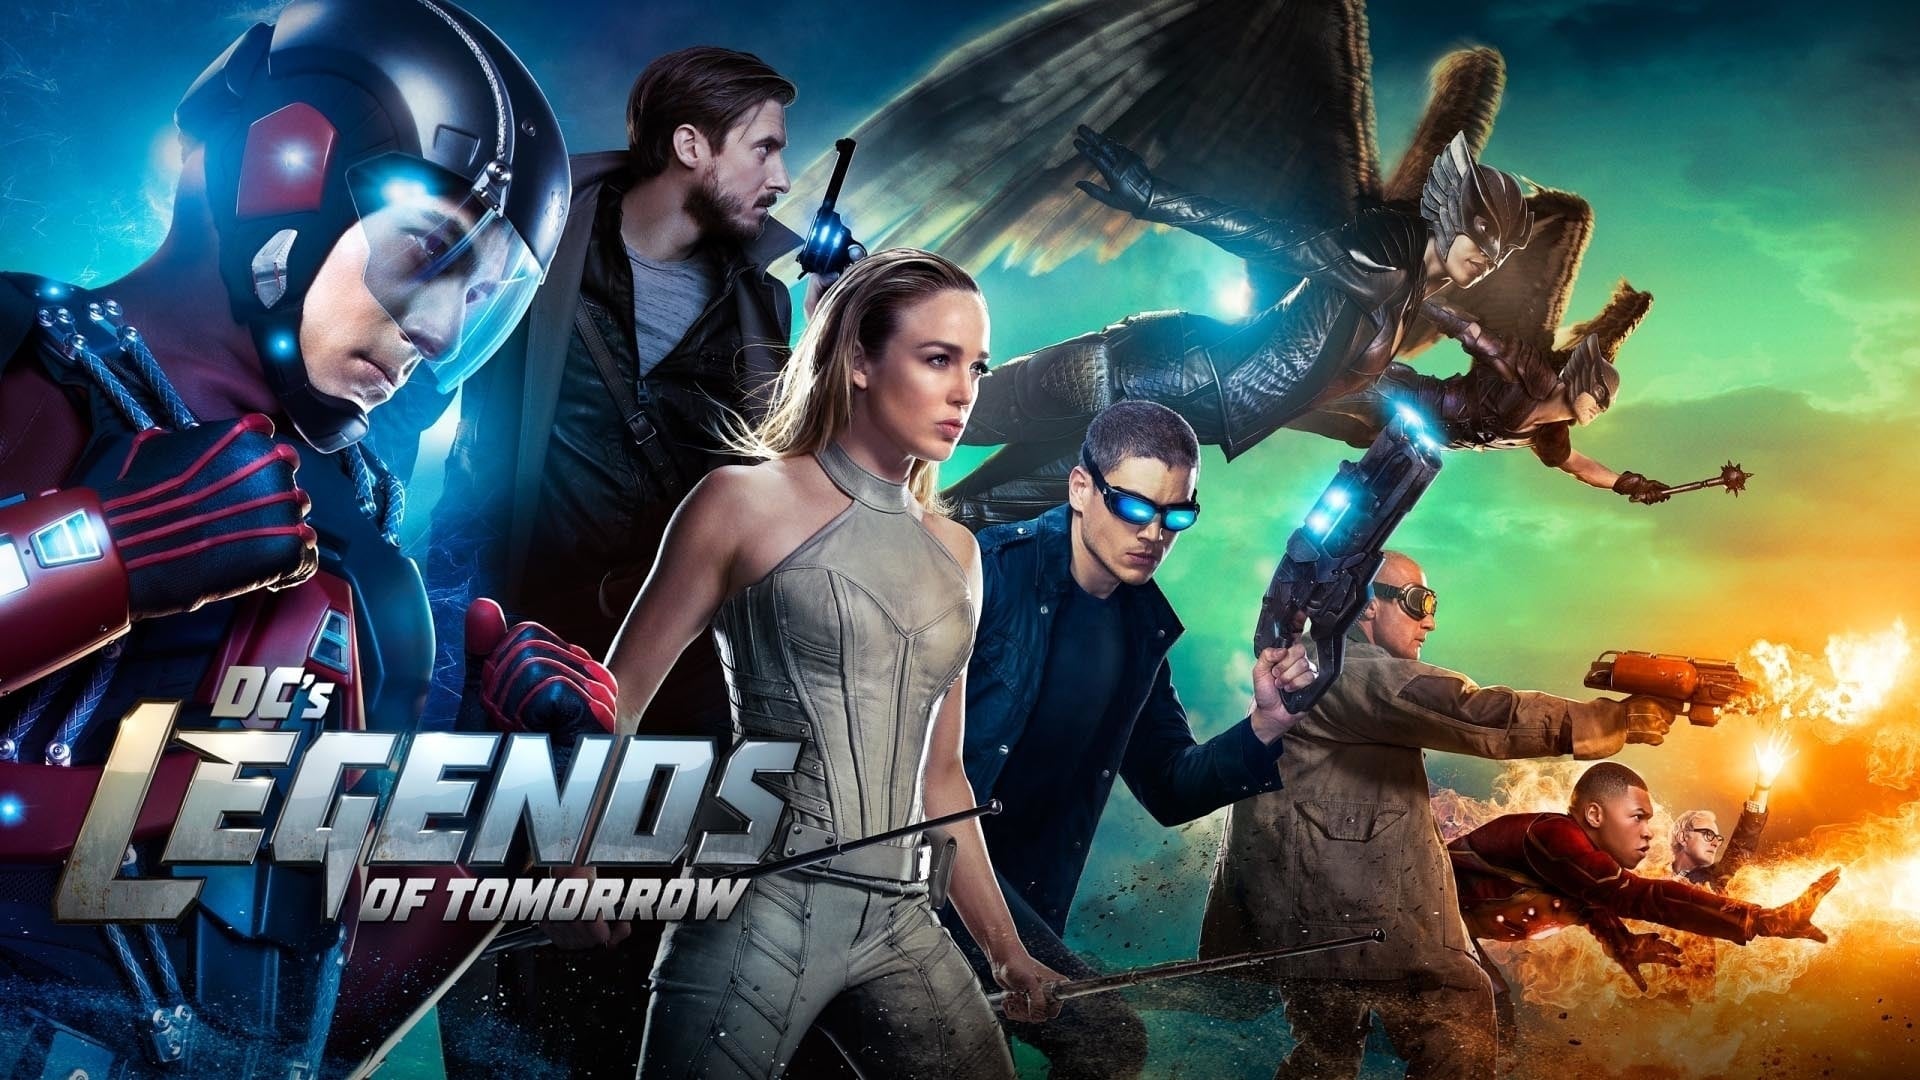 DC'S LEGENDS OF TOMORROW Season 6 Episode 7: Release Date and Time Confirmed